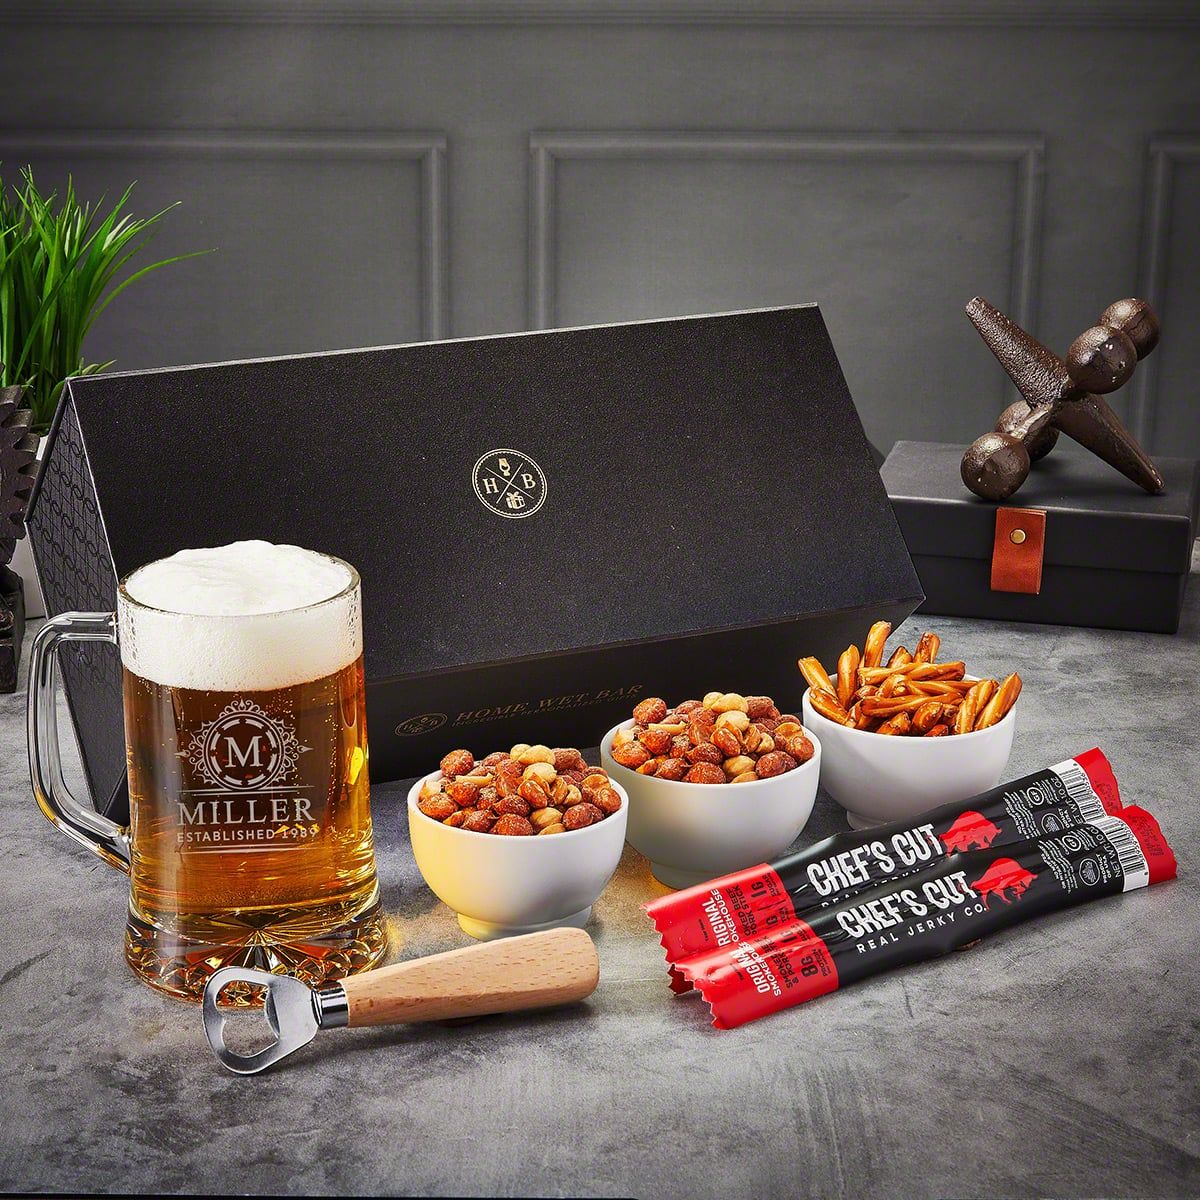 https://images.homewetbar.com/media/catalog/product/p/e/personalized-beer-gift-set-with-beer-mug-and-snacks-hamilton-p_10791.jpg?store=default&image-type=image